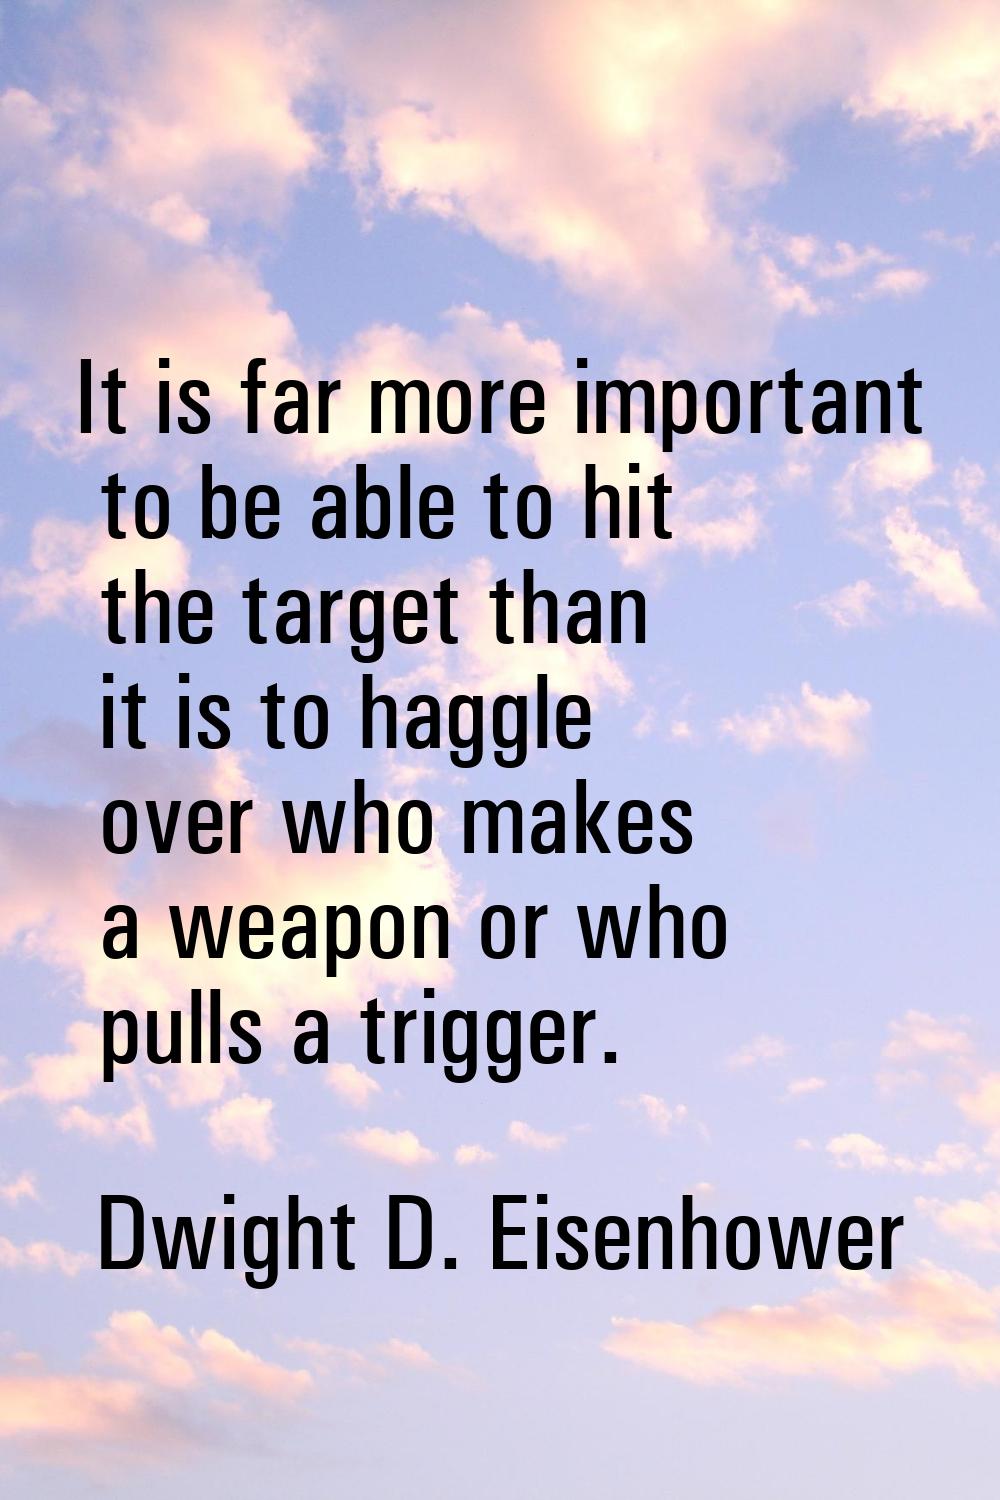 It is far more important to be able to hit the target than it is to haggle over who makes a weapon 